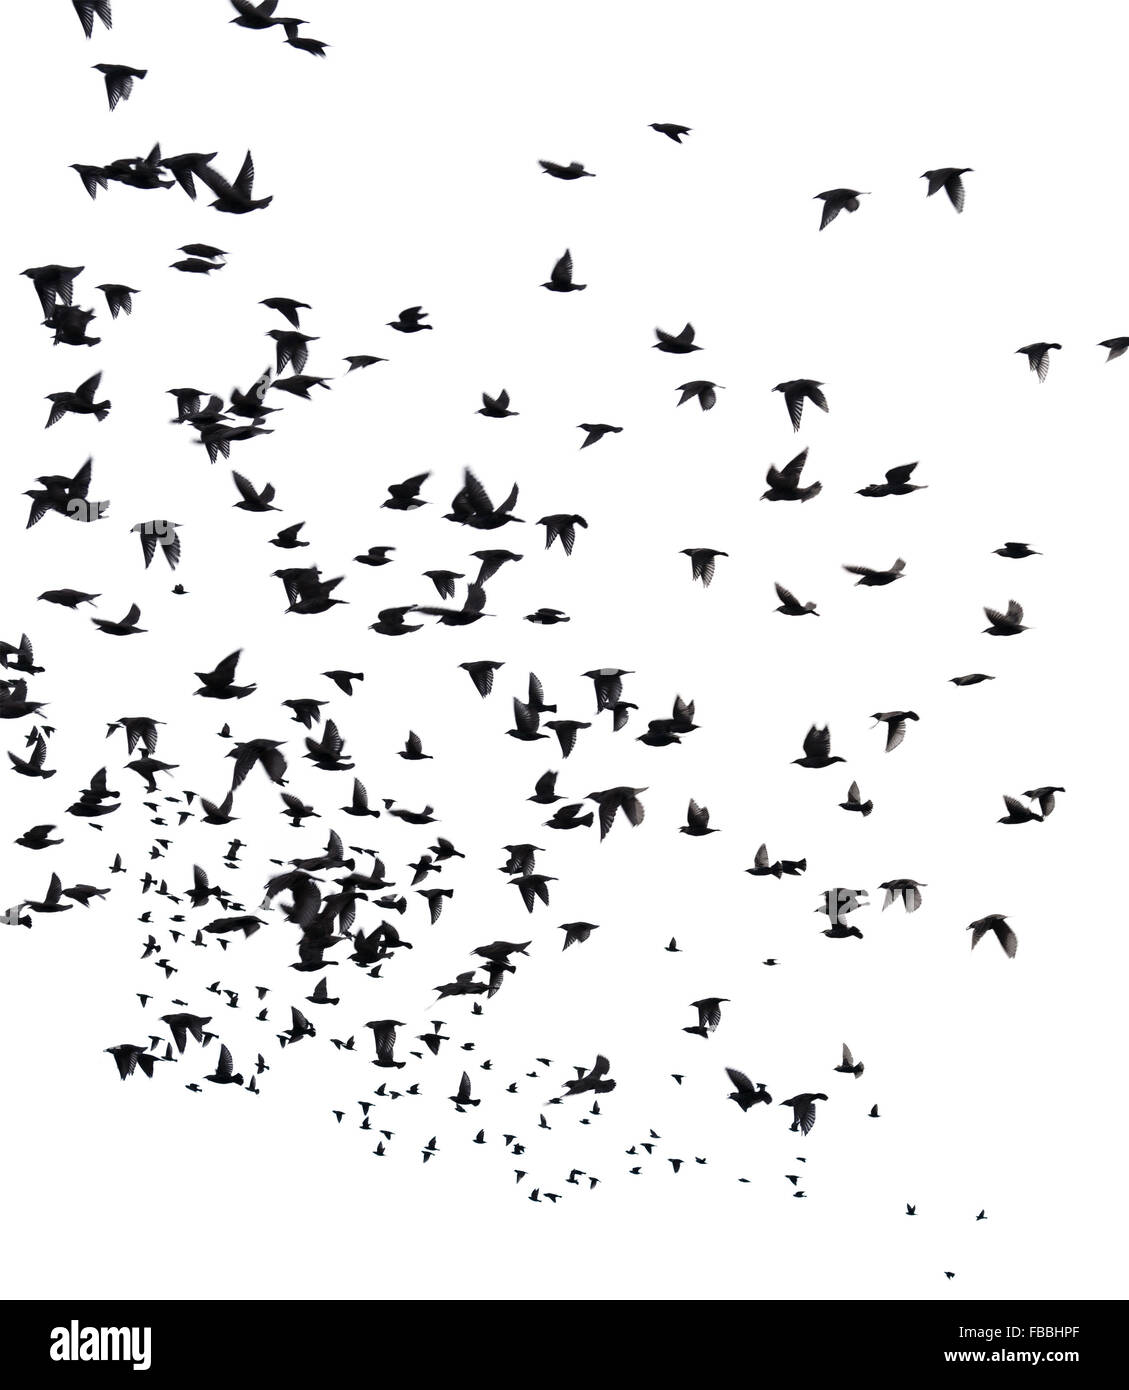 A flock of migratory birds. set of black silhouettes of birds flying in ...